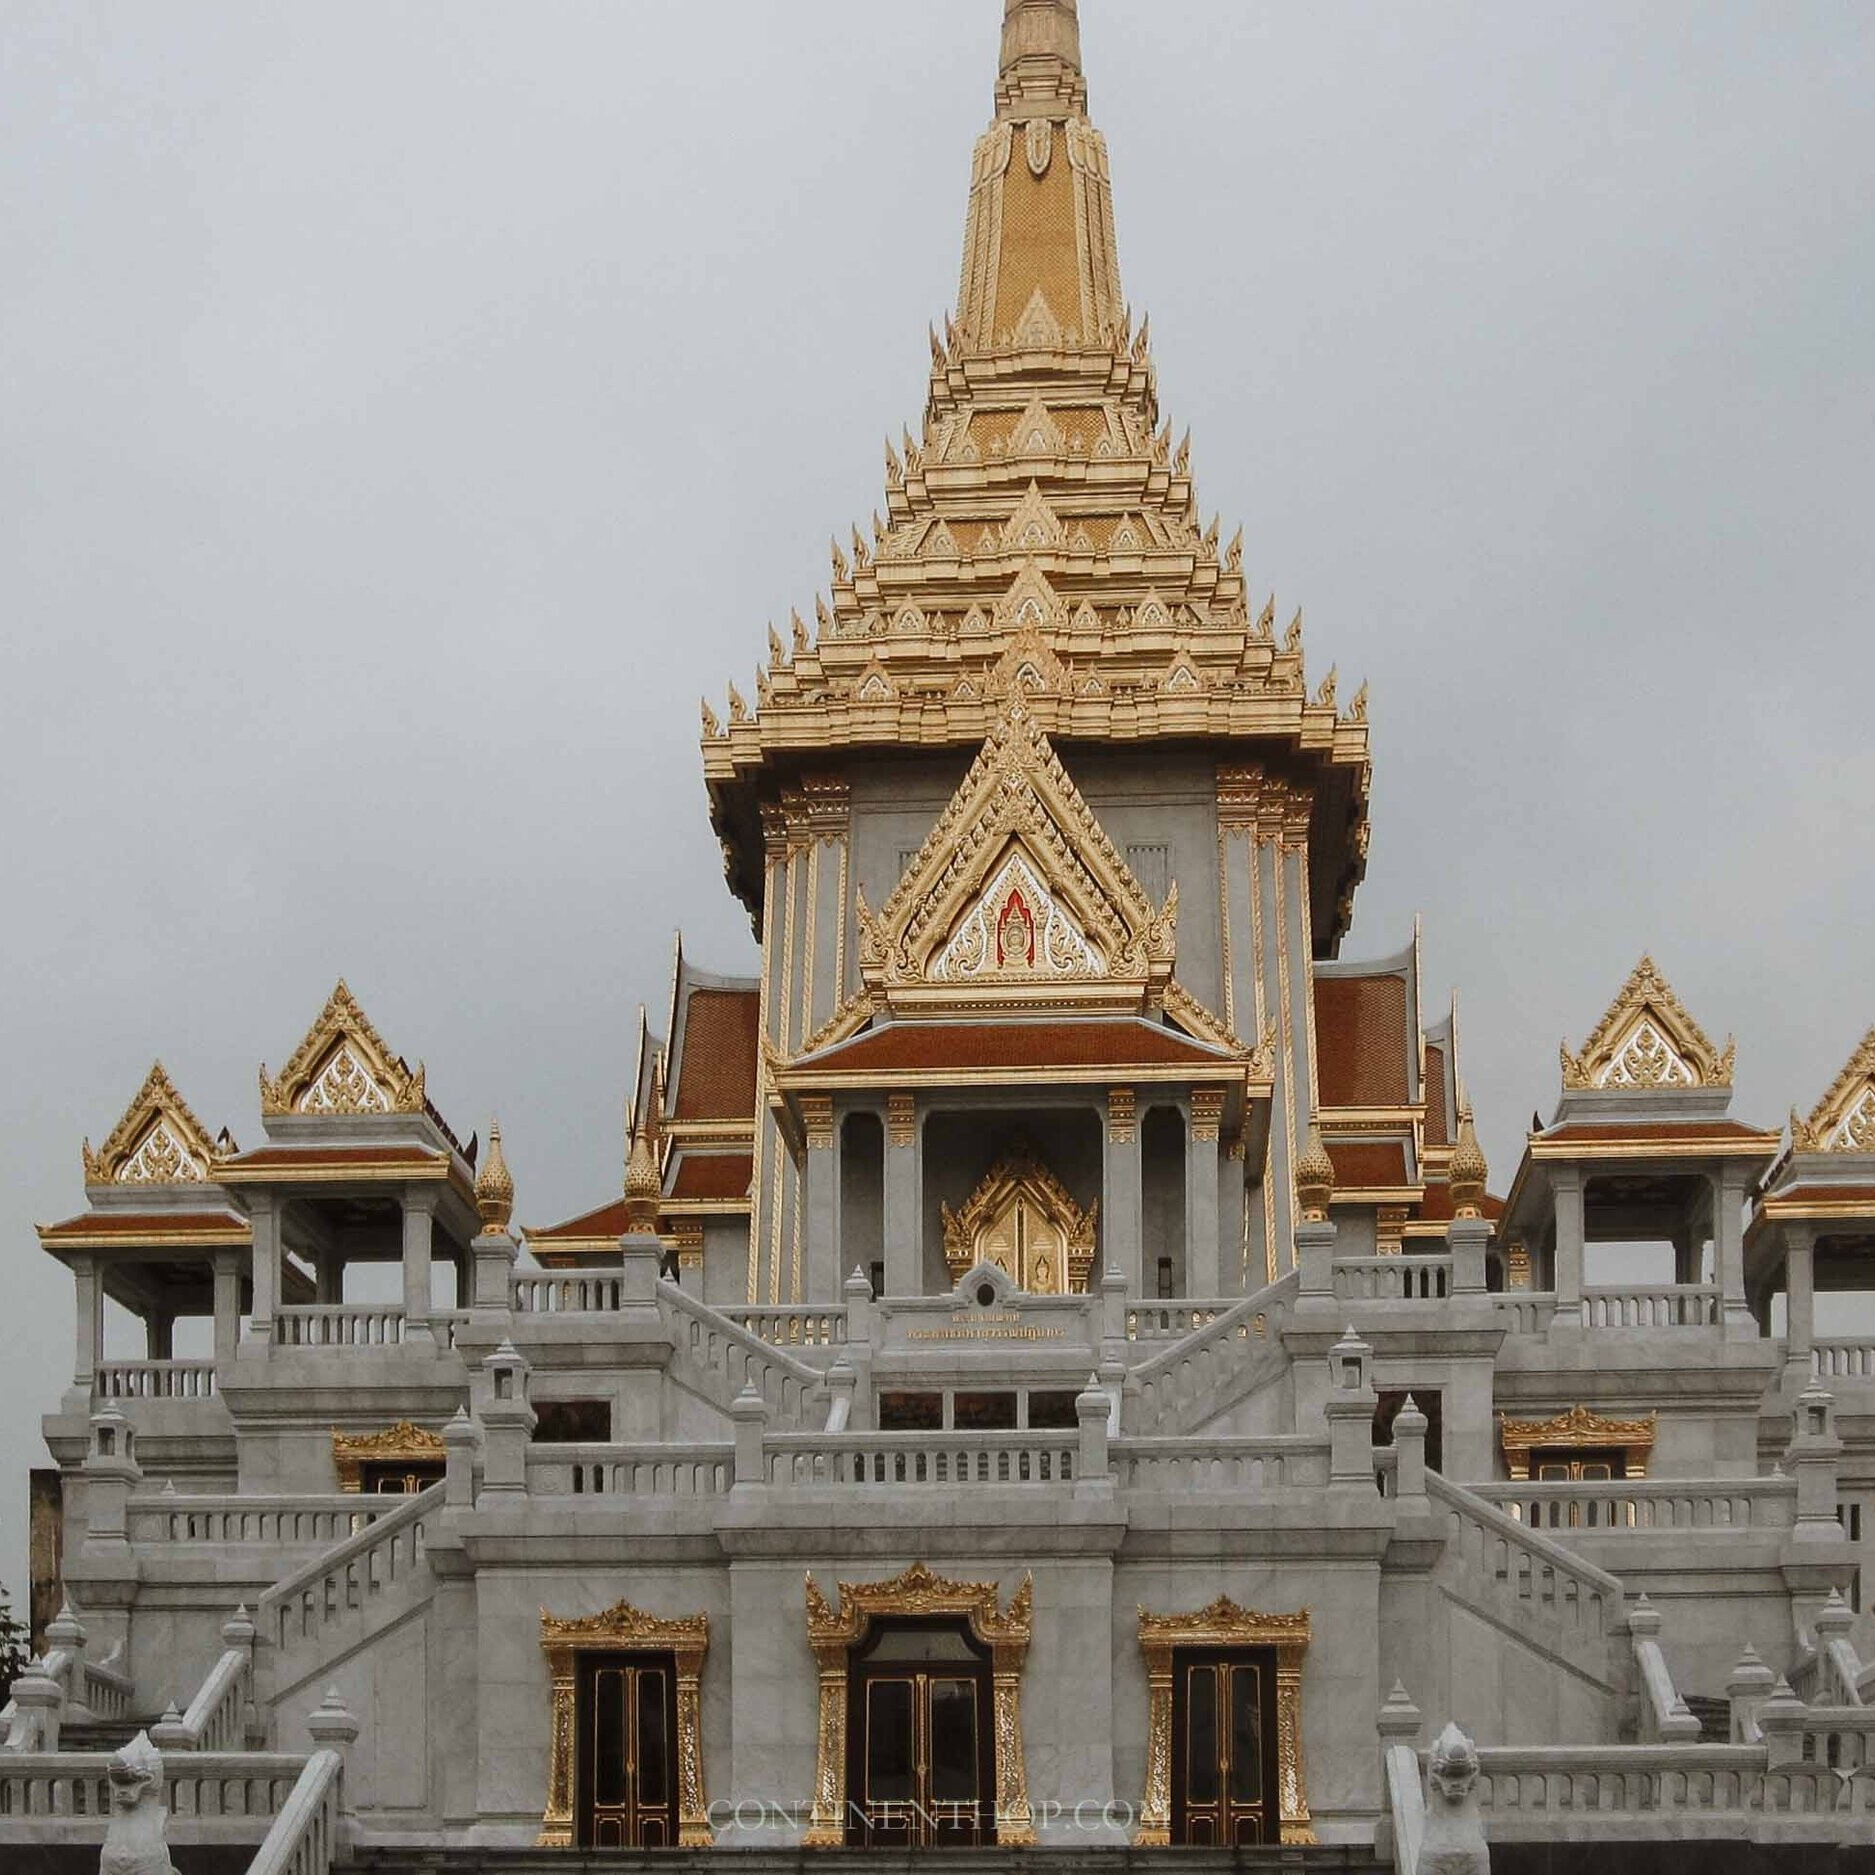 A beautiful white and gold Thai temple - Things to do on your 7 days in thailand itinerary